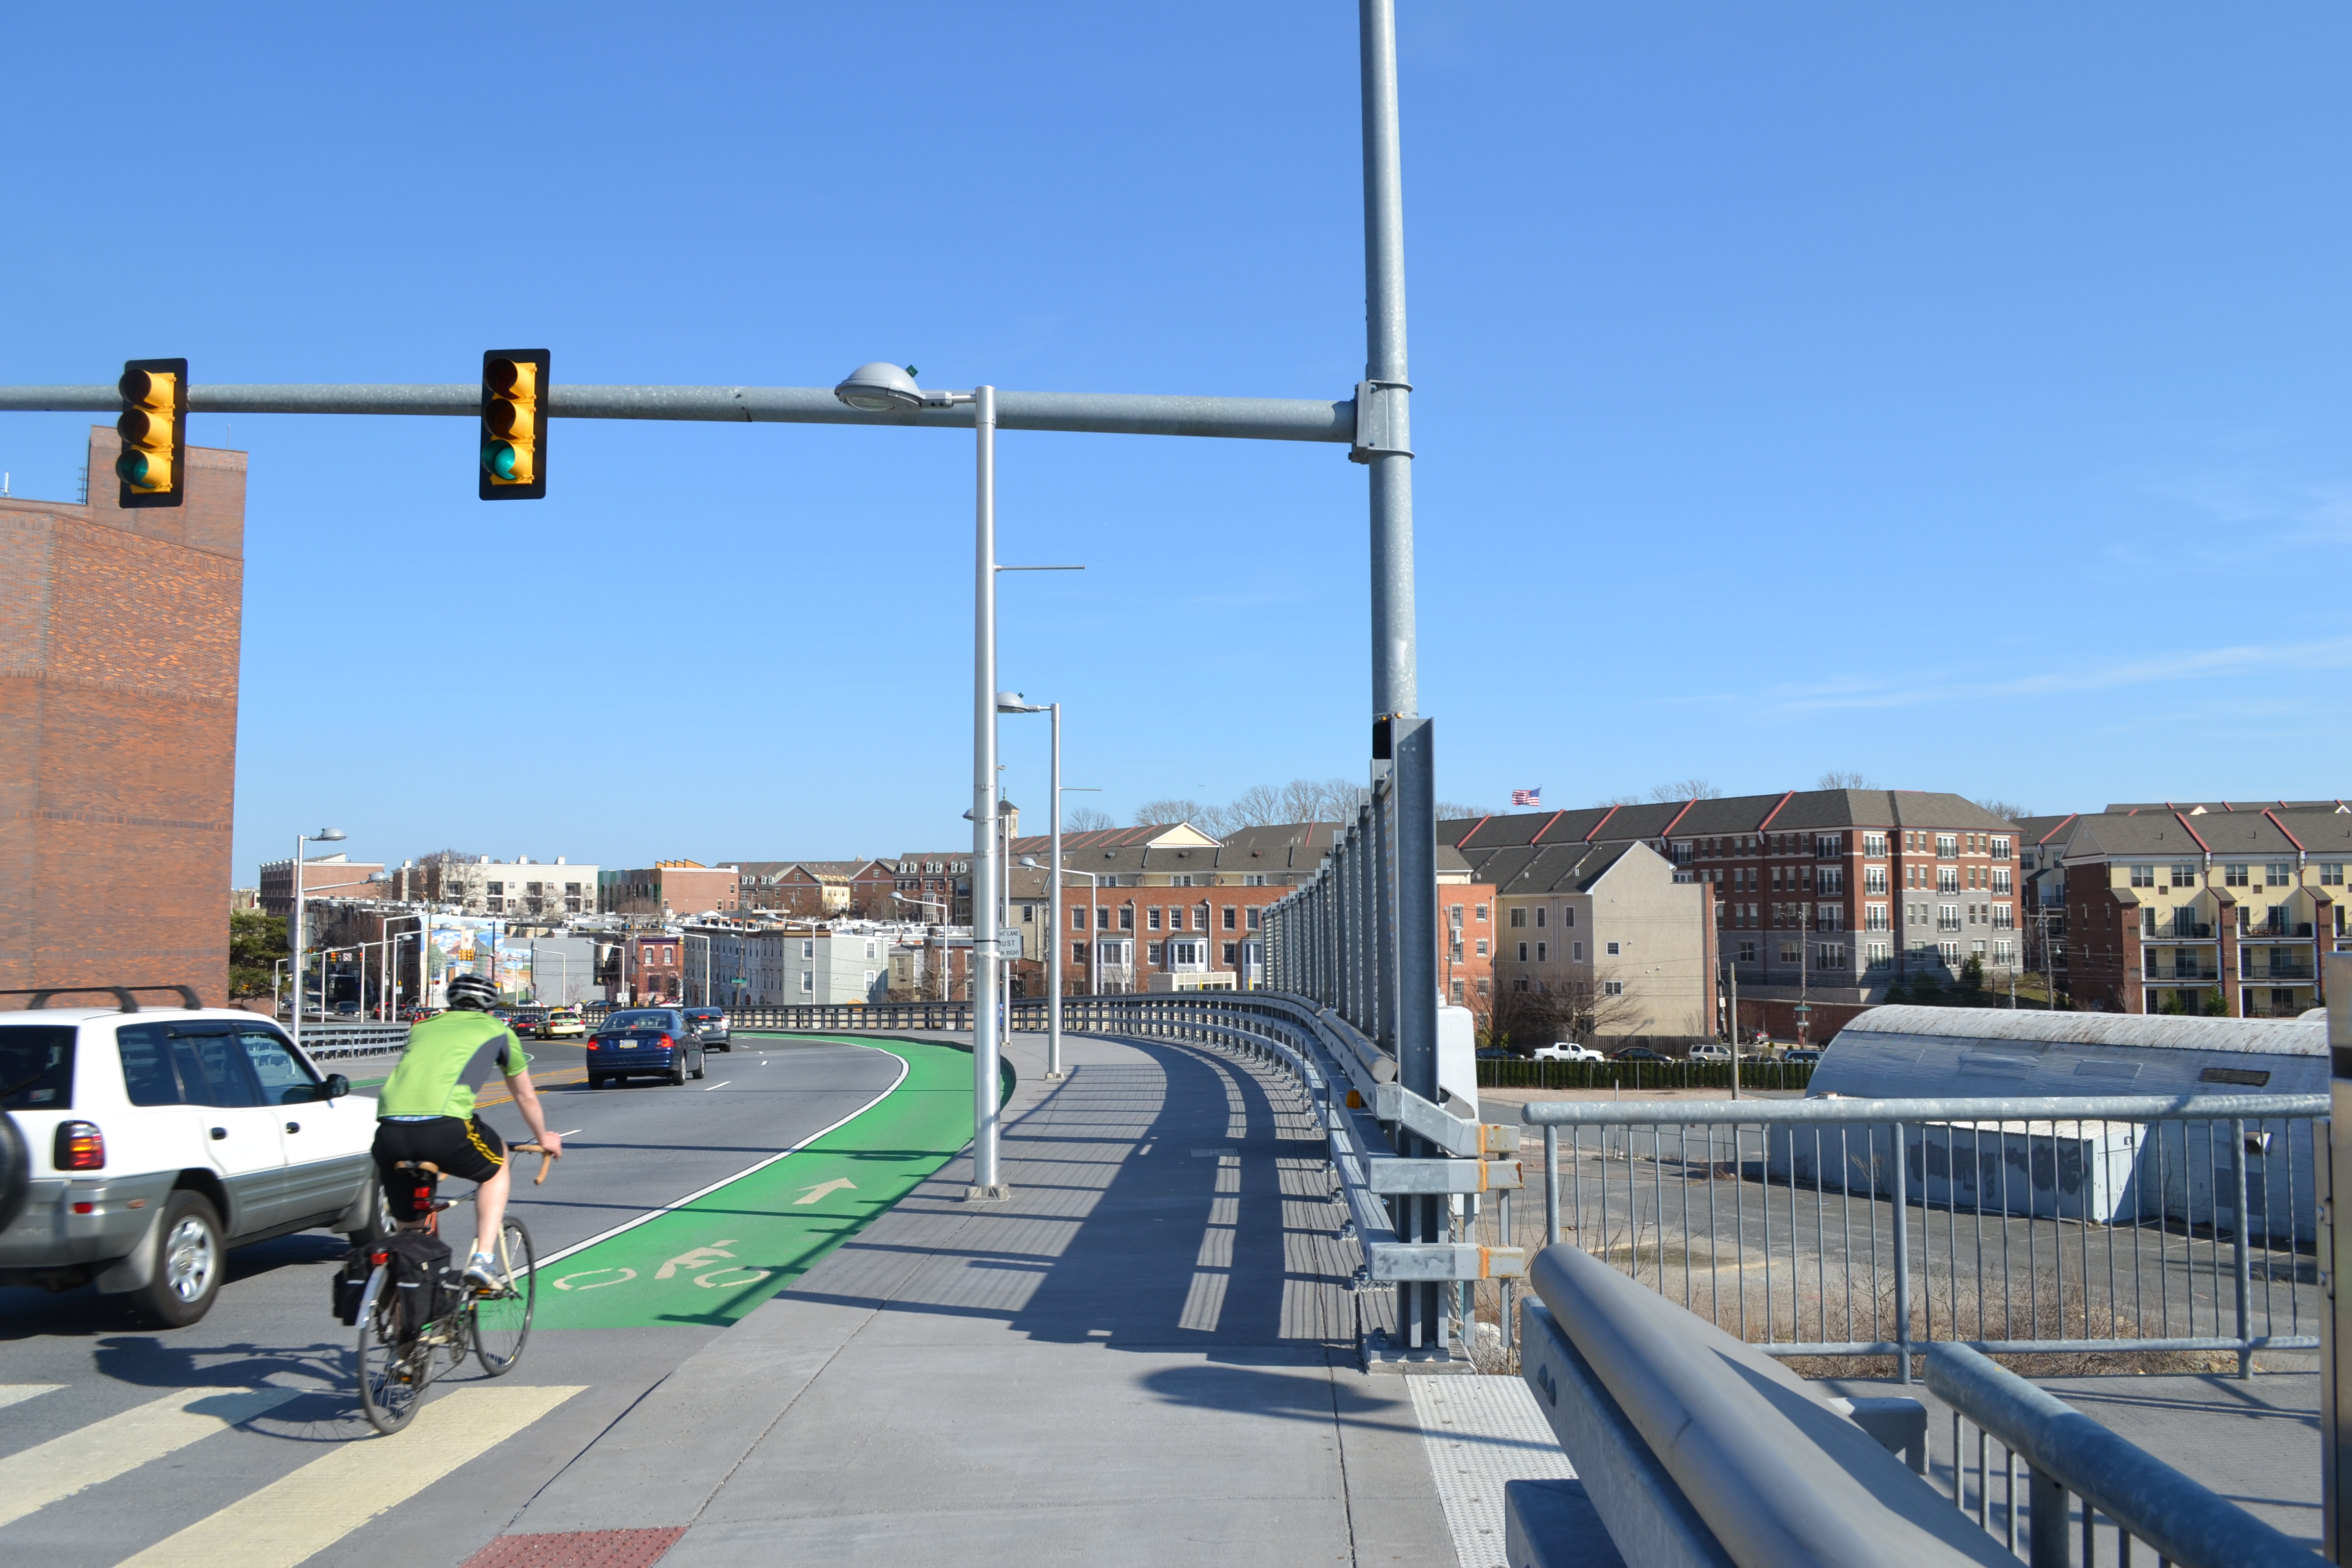 The Bicycle Coalition of Greater Philadelphia wants to shift the bike lanes closer to the top of the bridge to reduce conflicts with the proposed driveways